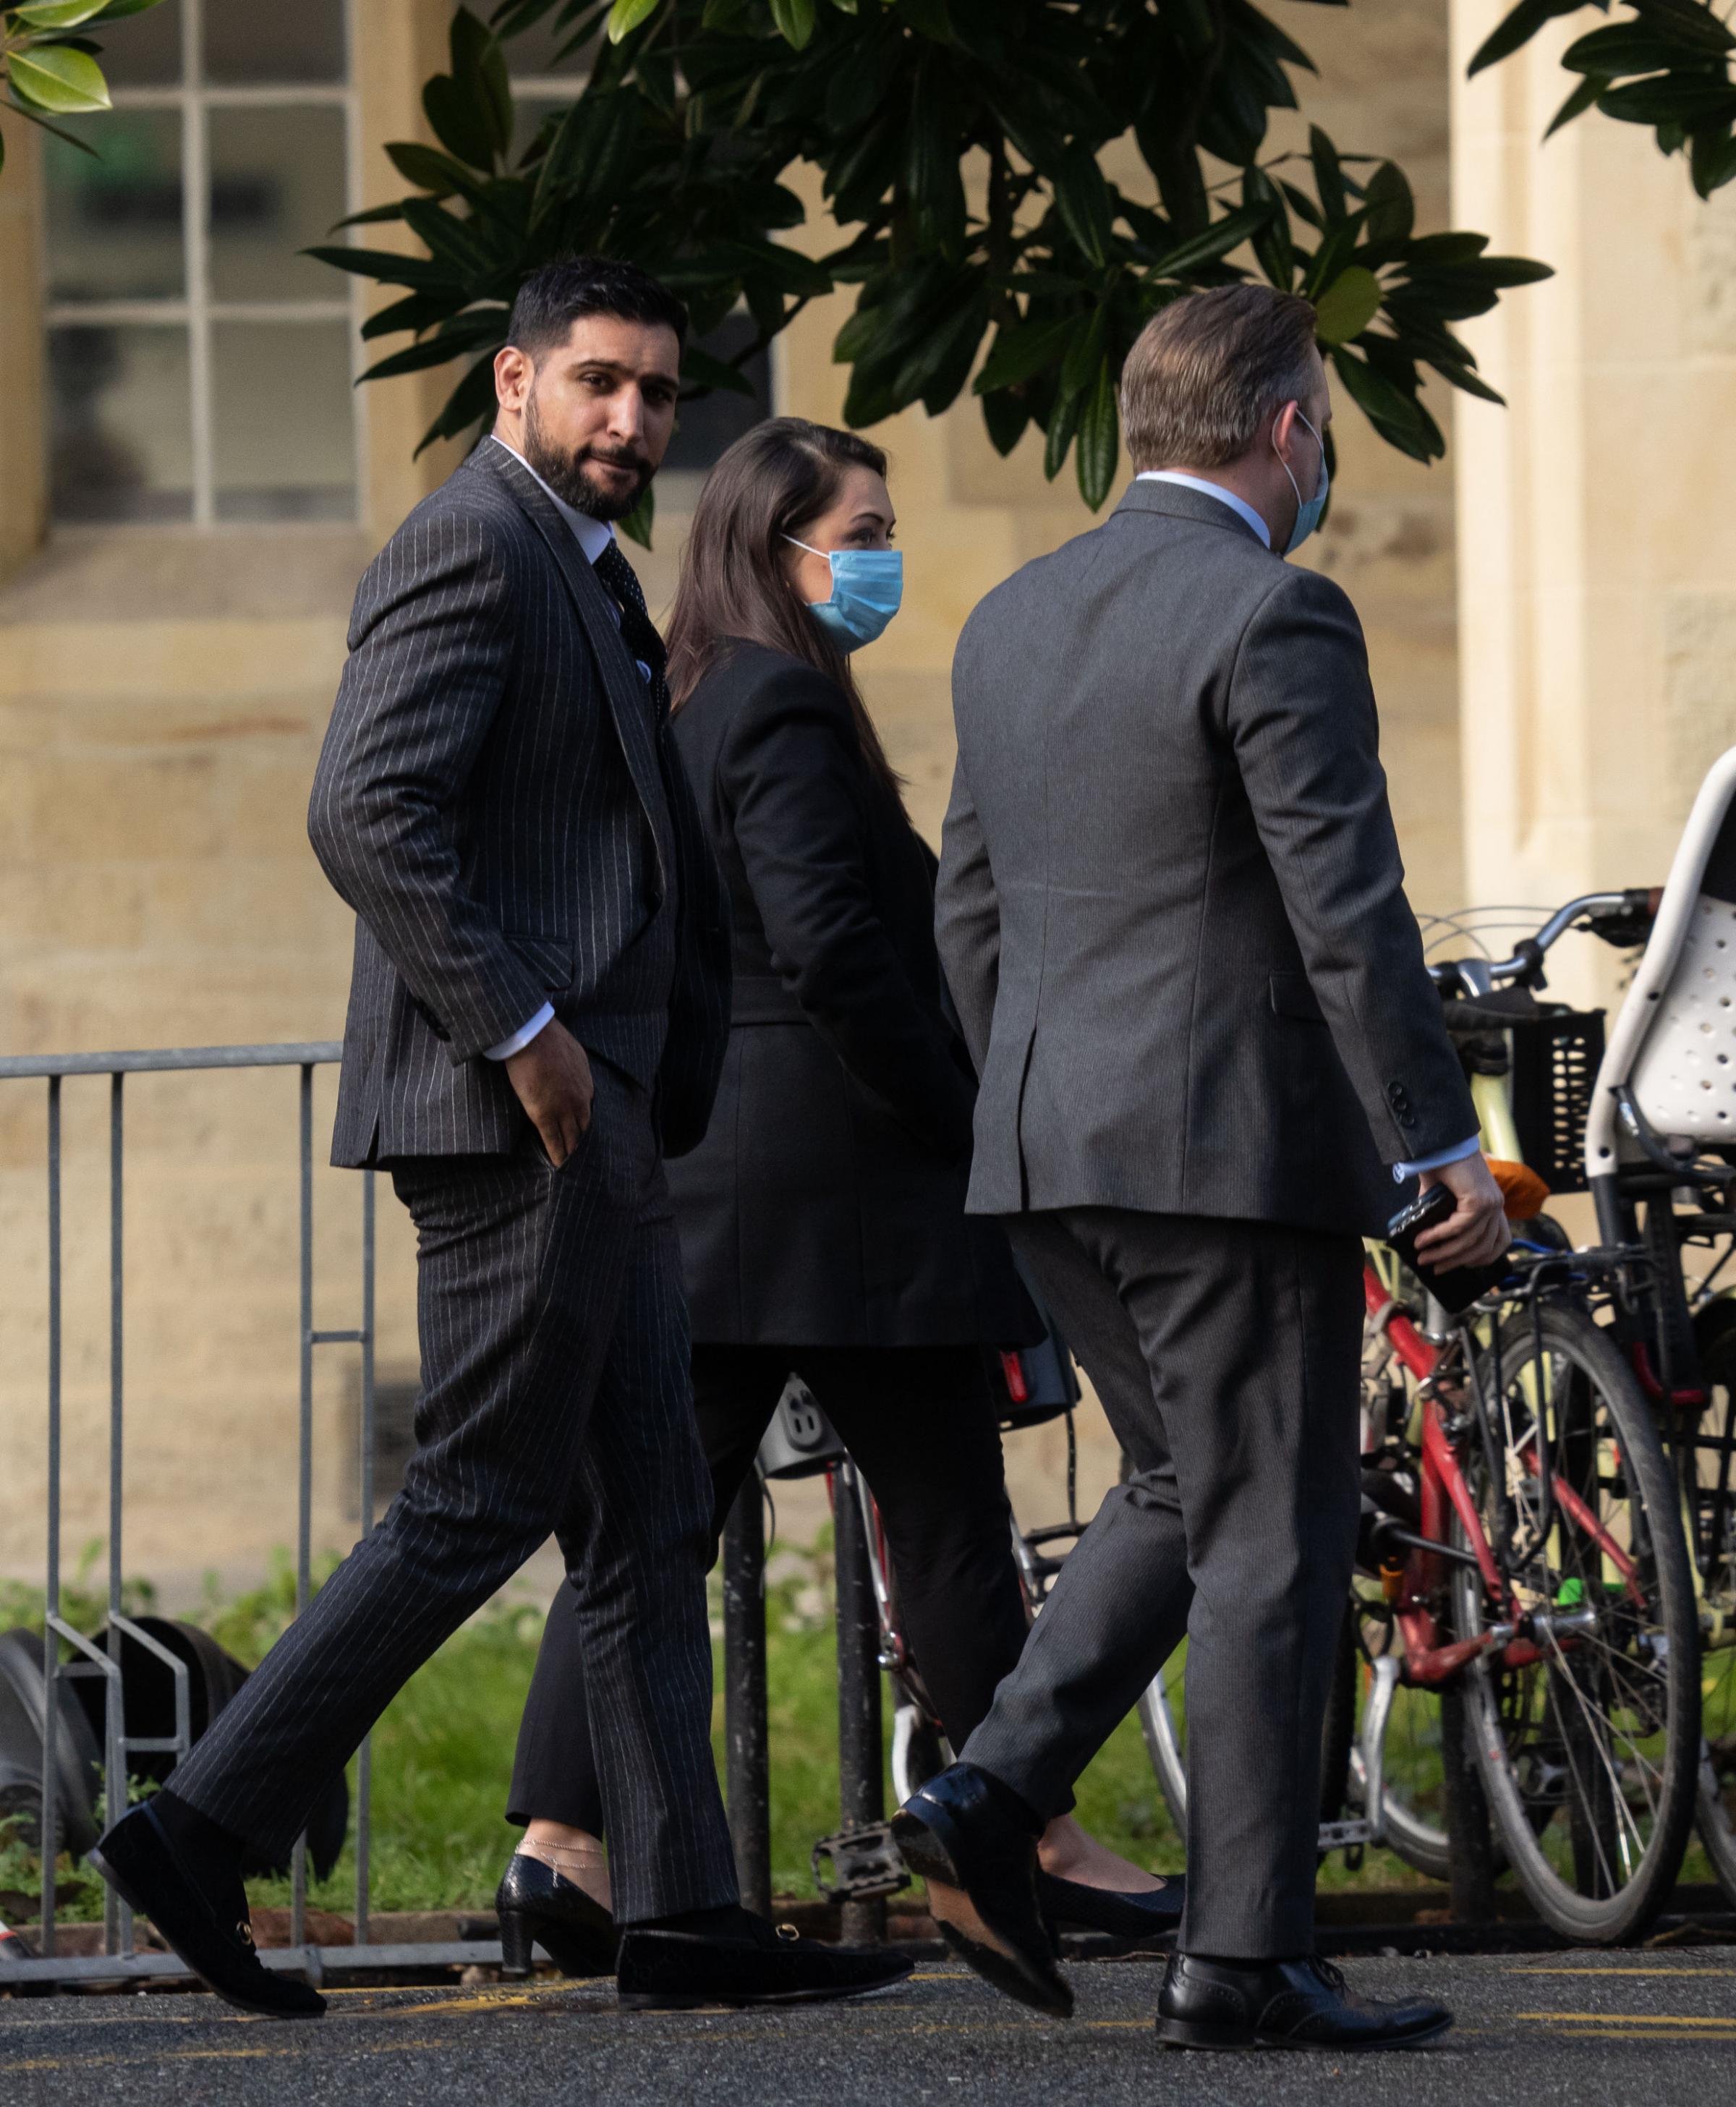 Former world boxing champion Amir Khan, (left) arrives at Snaresbrook Crown Court, in east London, where three men are accused of robbing the boxer of a diamond watch at gunpoint. Khans 72,000 custom-made Franck Muller watch was stolen in High Road,